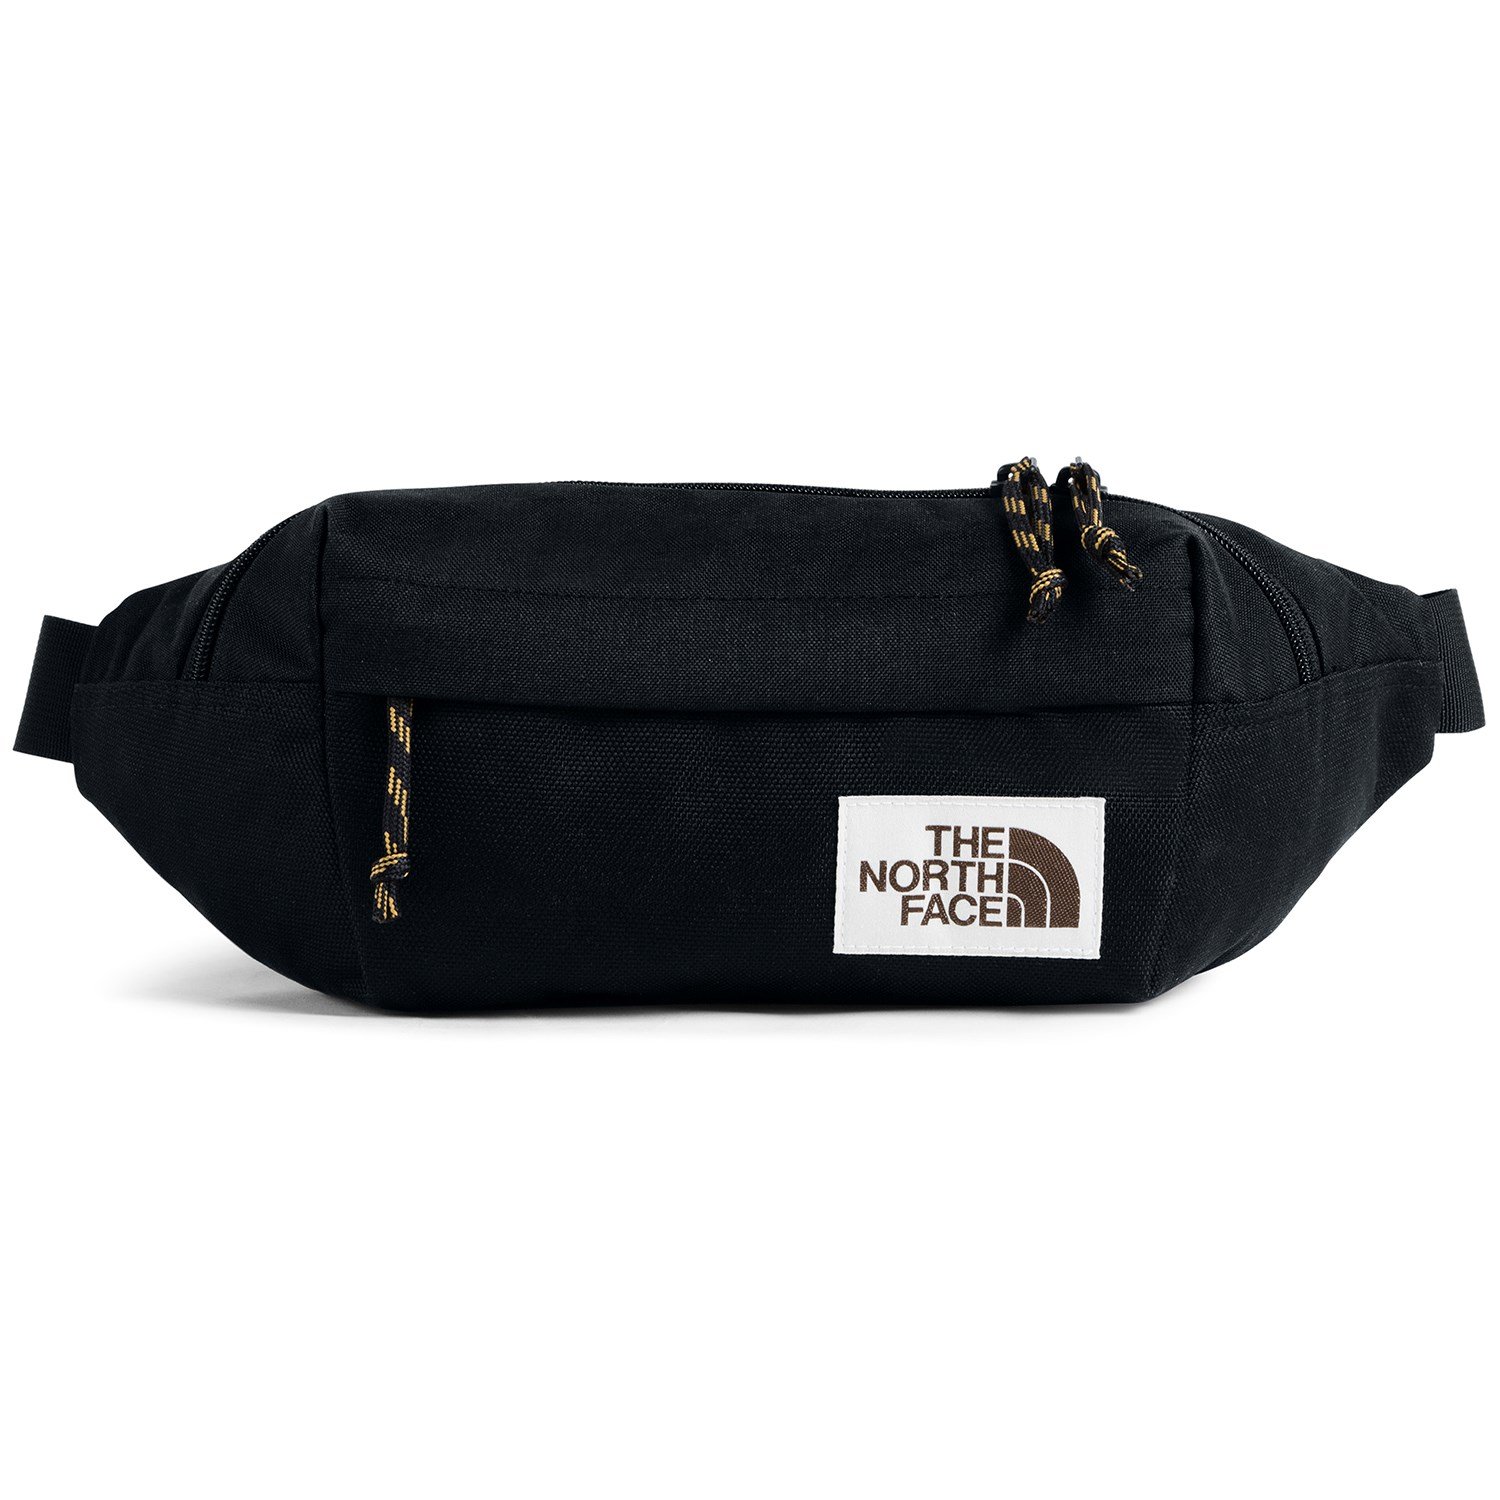 The North Face Lumbar Pack | evo